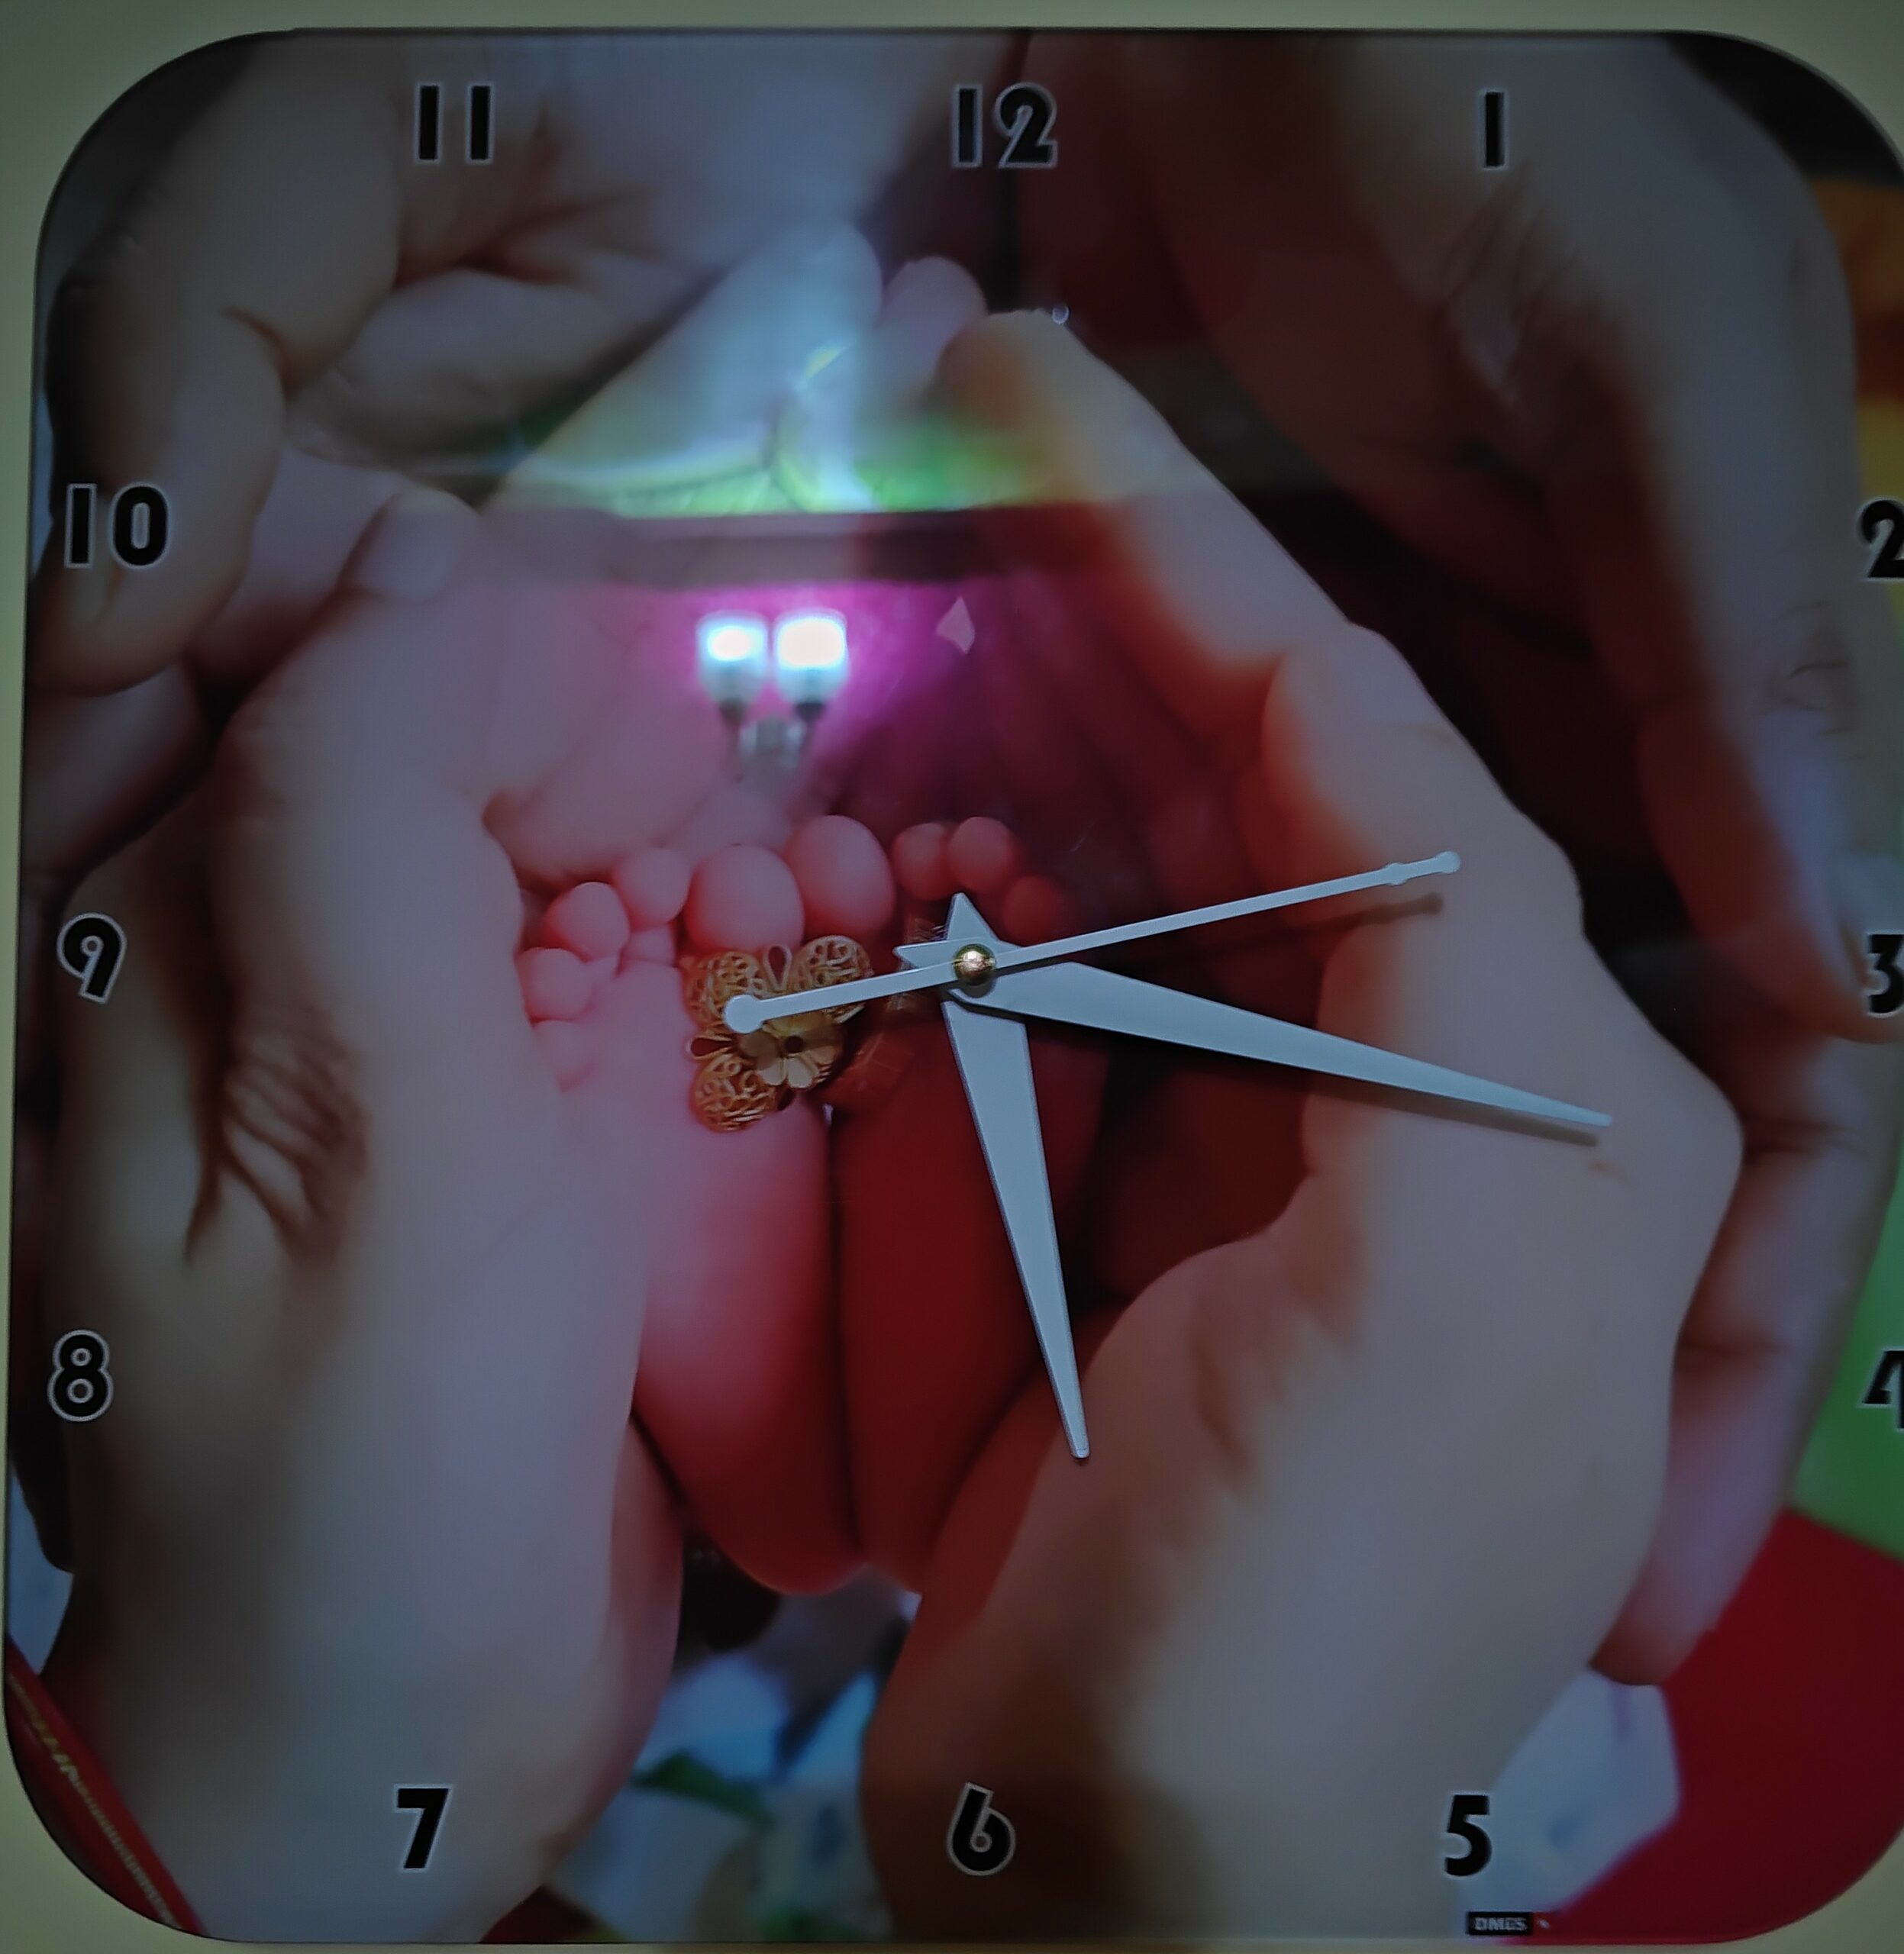 Customised Premium OMGs Acrylic Wall Clock photo review